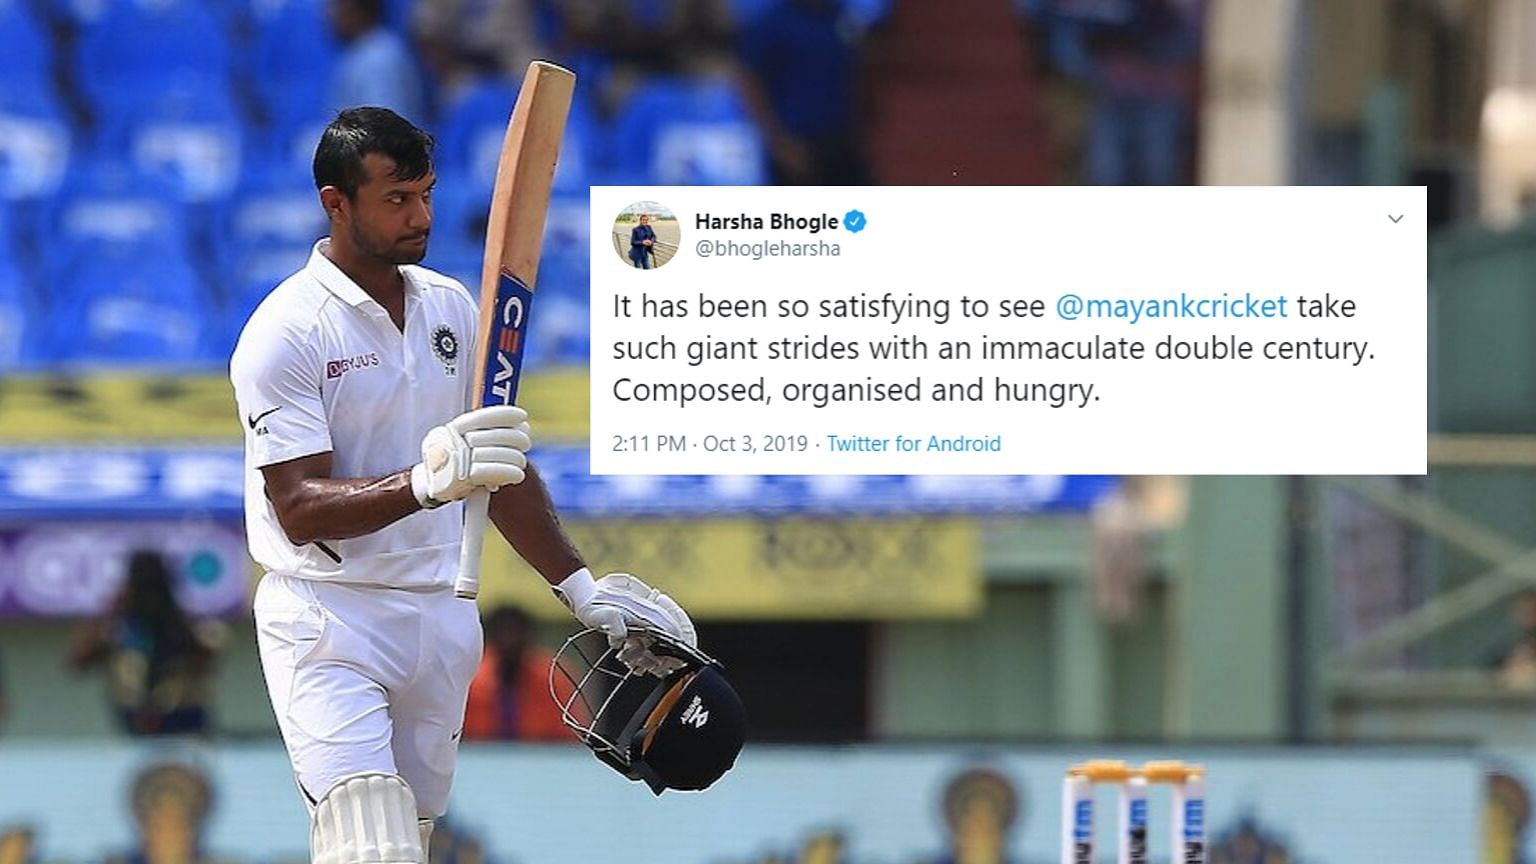 Mayank Agarwal got to his double-century off 359 balls, which included 22 boundaries and five sixes.